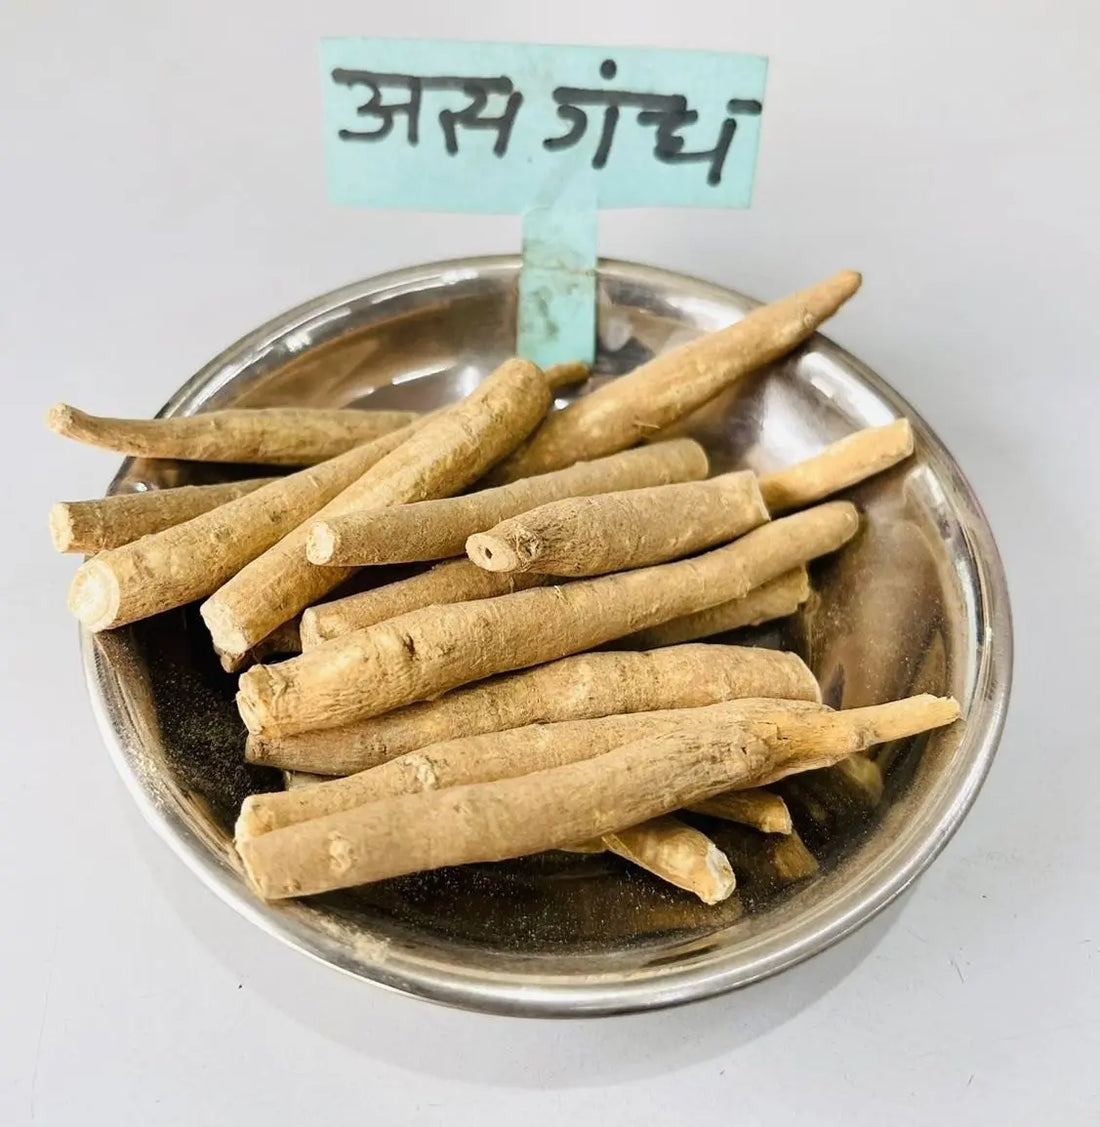 What are the benefits of Ashwagandha, what are its other names in India, what are the side effects, how should it be taken, and what are some homemade remedies involving it? Nutrixia Food